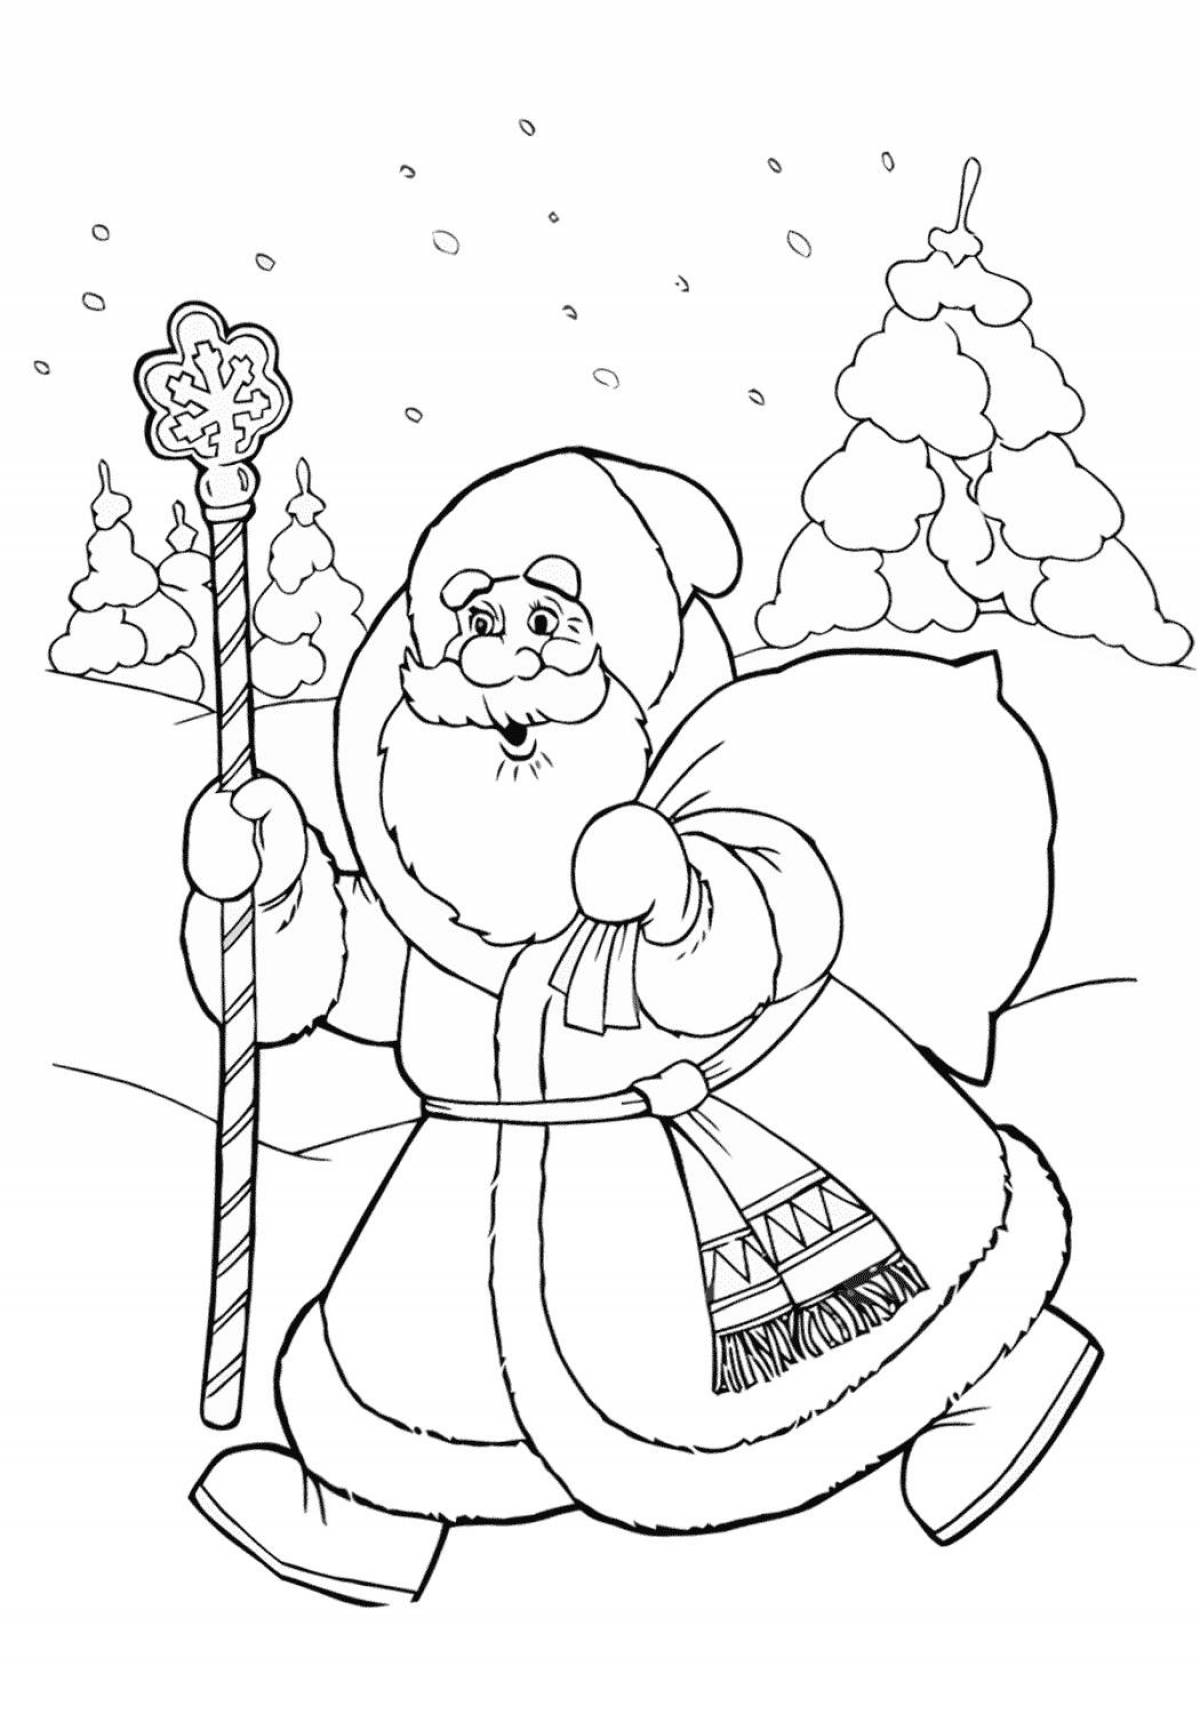 Amazing coloring page of ayaz ata